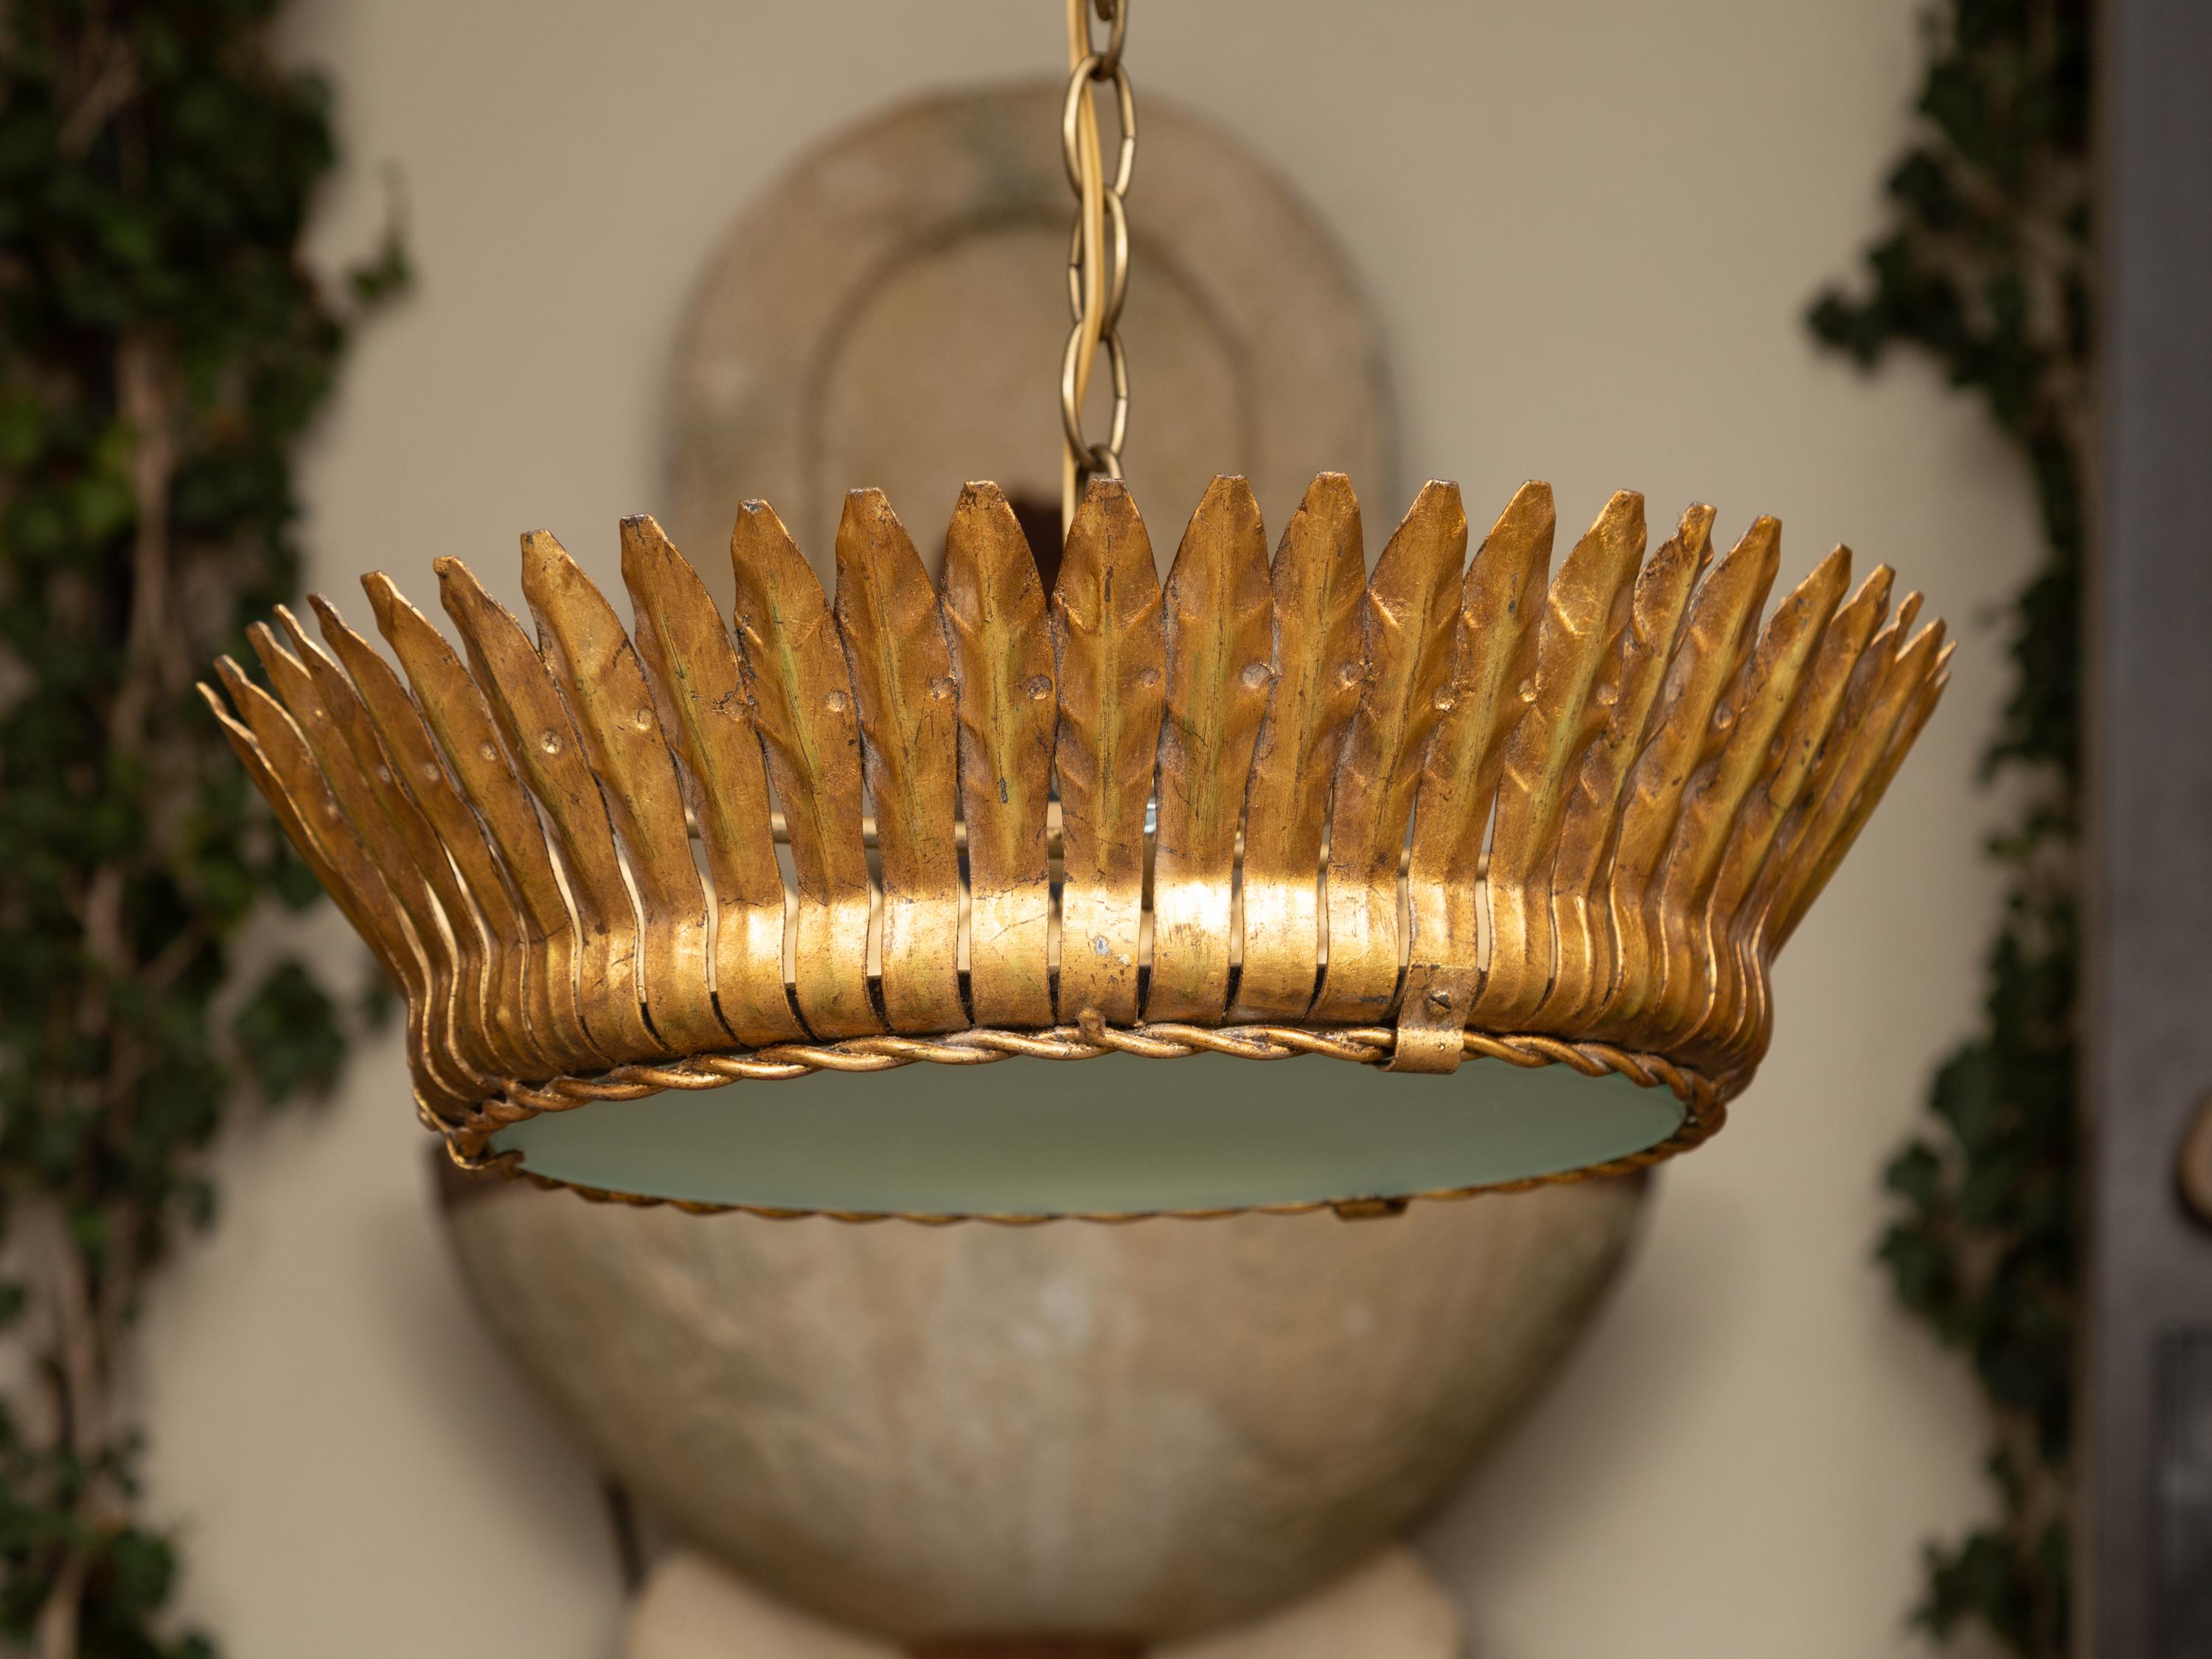 A Spanish vintage crown semi-flush gilt metal chandelier from the mid-20th century with leaf motifs, two bulbs and frosted glass. Crafted in Spain during the midcentury period, this \ gilt metal chandelier is adorned with leaf motifs all the way